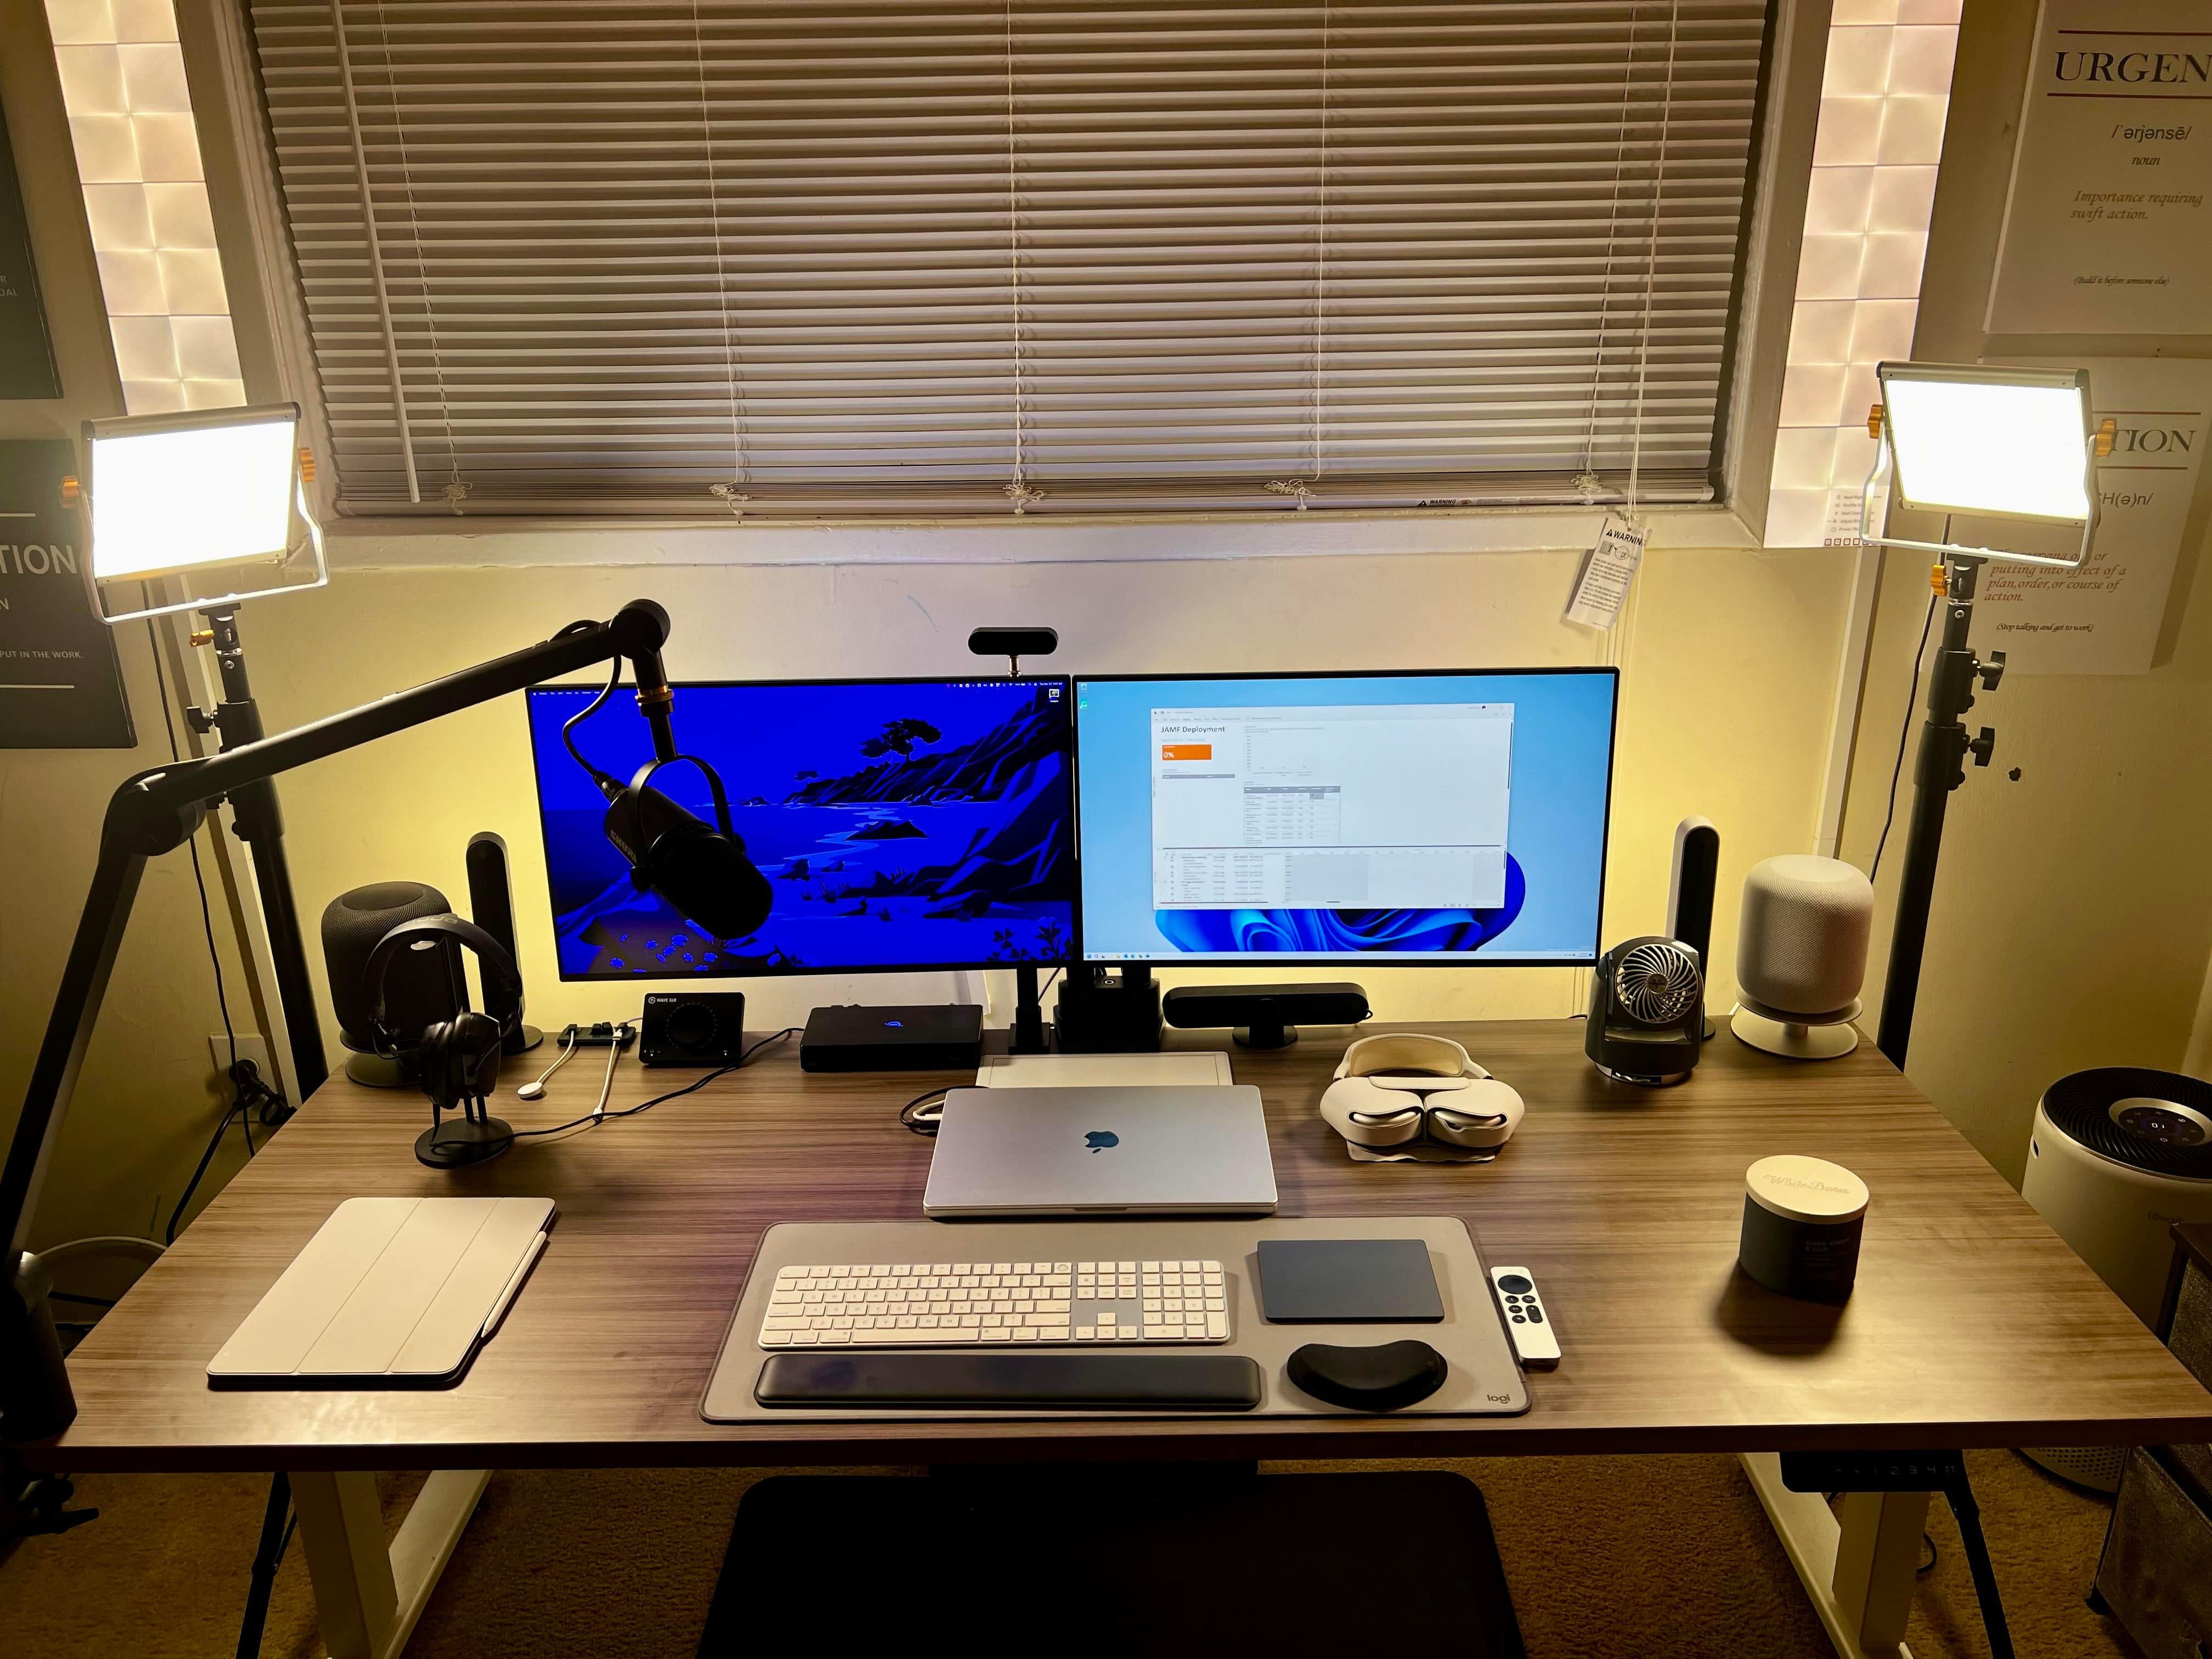 Here's a closer look at the setup proper. We envy those paired original HomePods.